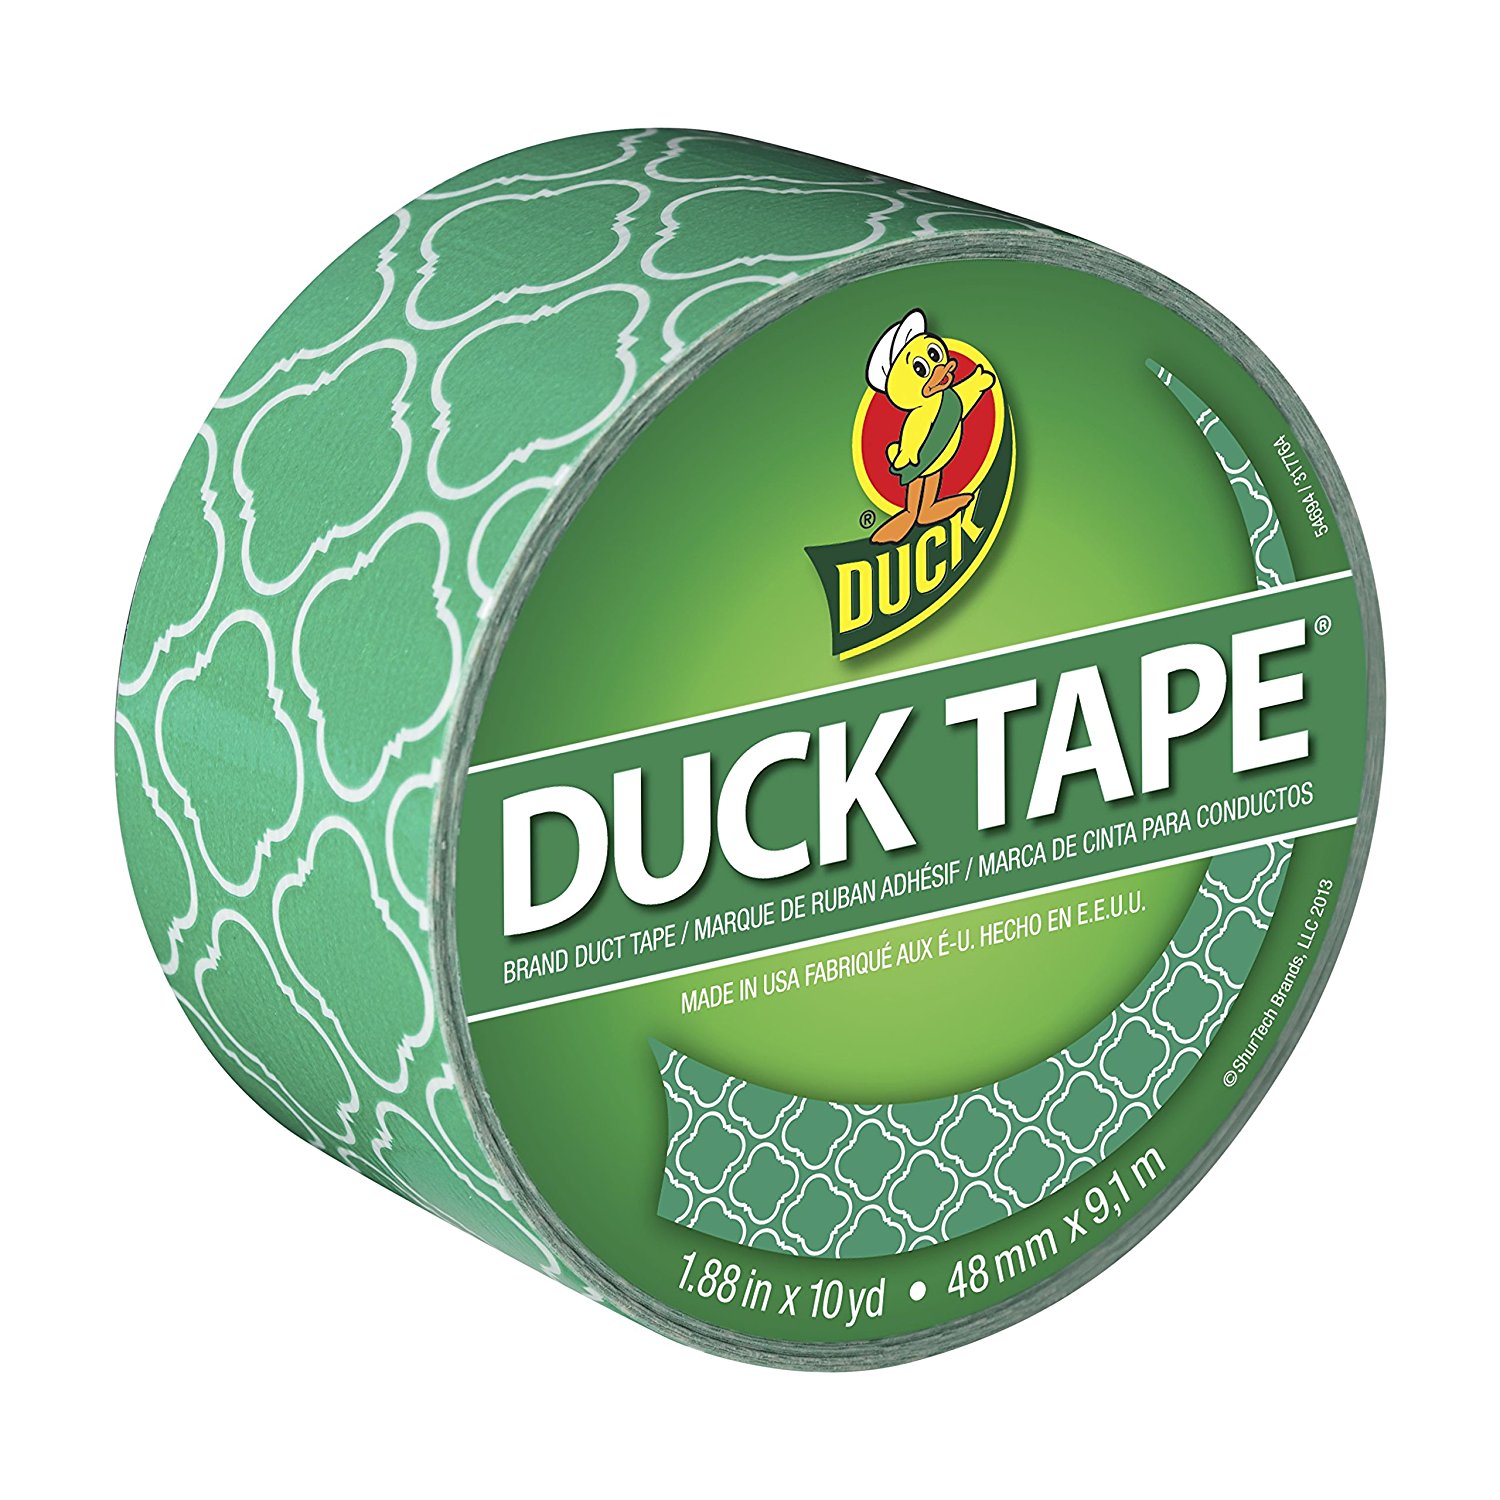 Duck Brand 282565 Printed Duct Tape, Emerald Tile, 1.88 Inches x 10 Yards, Single Roll - image 1 of 2